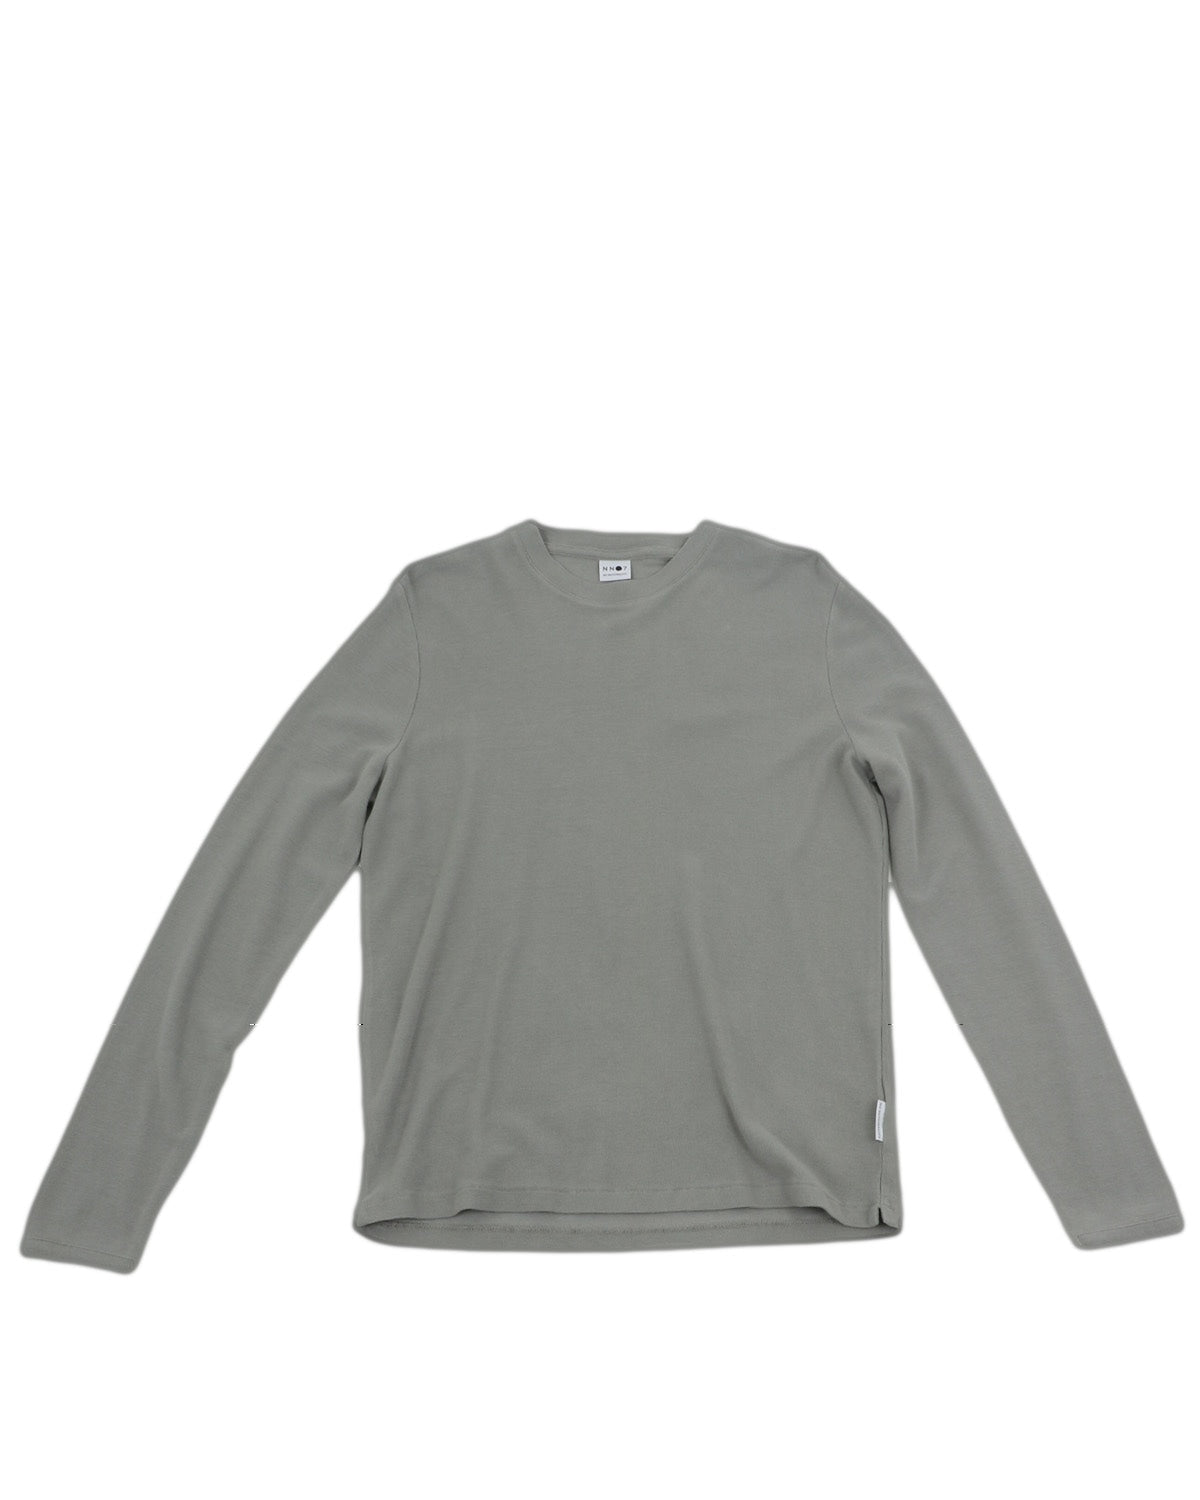 no nationality_clive longsleeve_clive longsleeve_grey_1_2